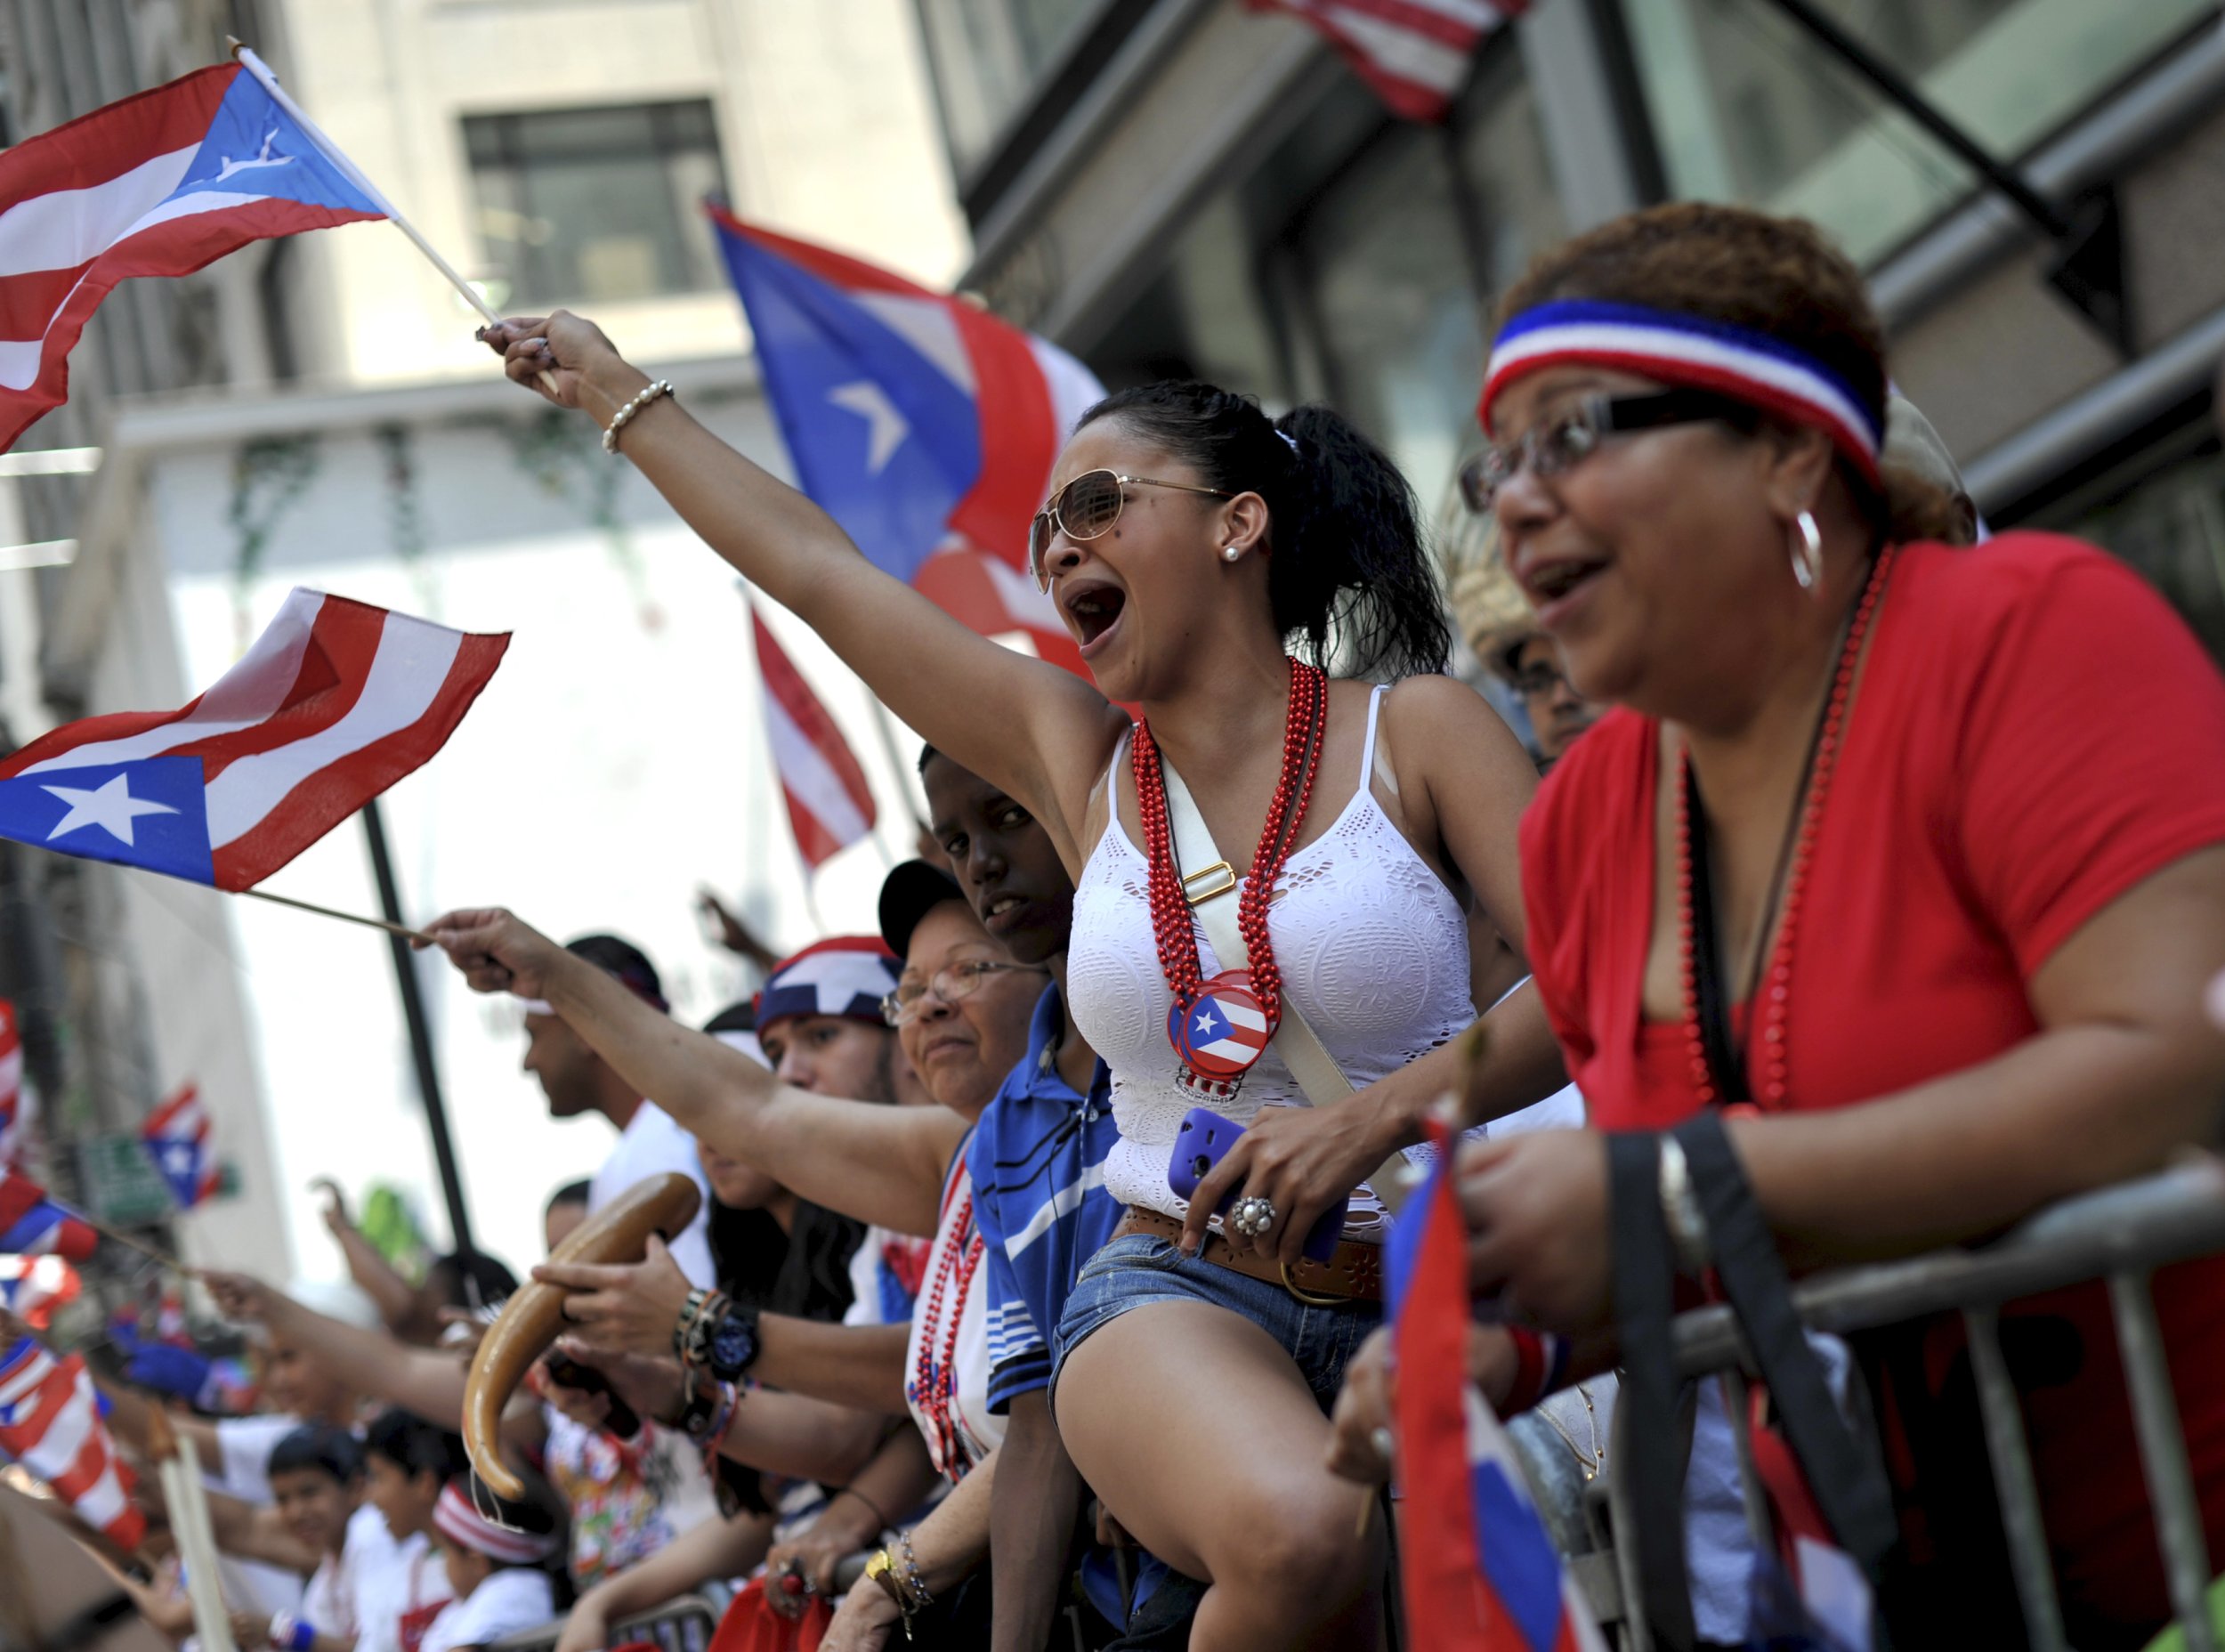 Puerto Rican Day Parade New York 2015 Route Map, Start Time